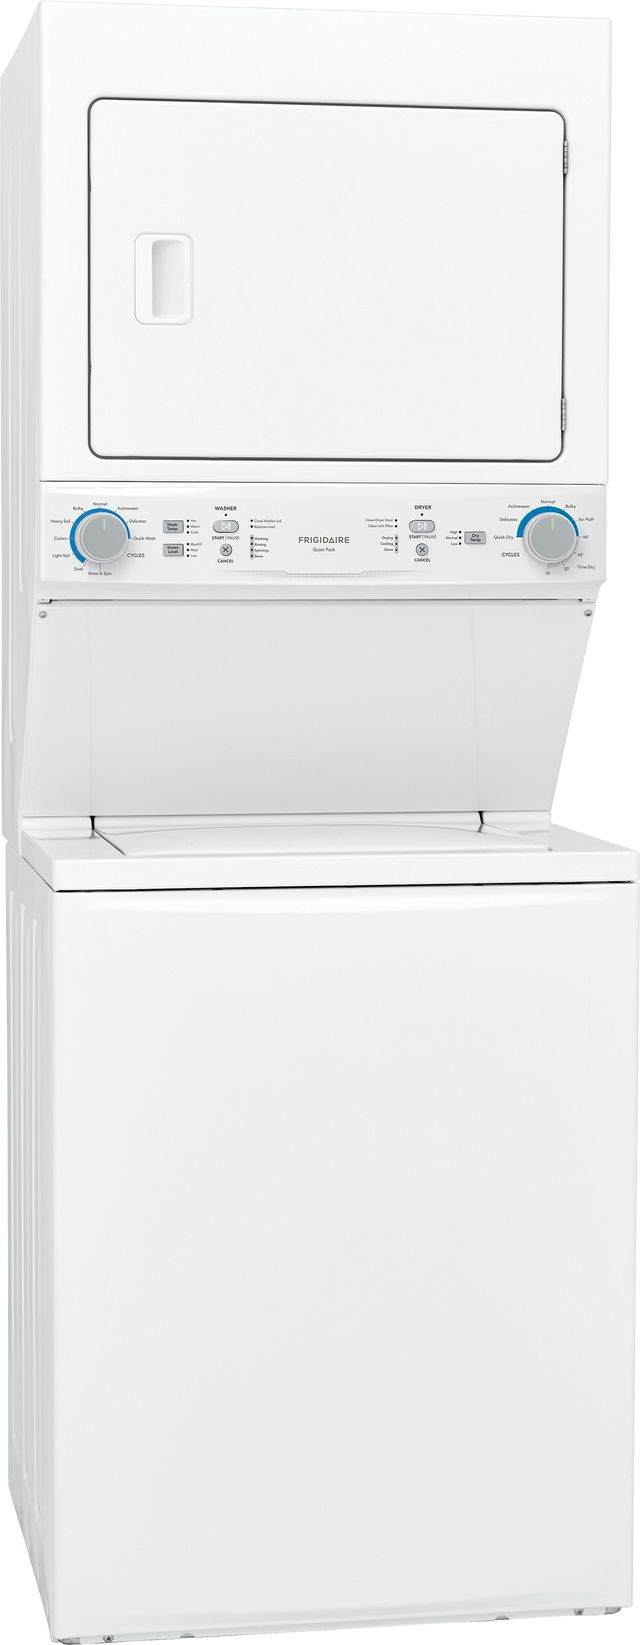 Frigidaire® 3.9 Cu. Ft. Washer, 5.6 Cu. Ft. White Gas Stack Laundry 8